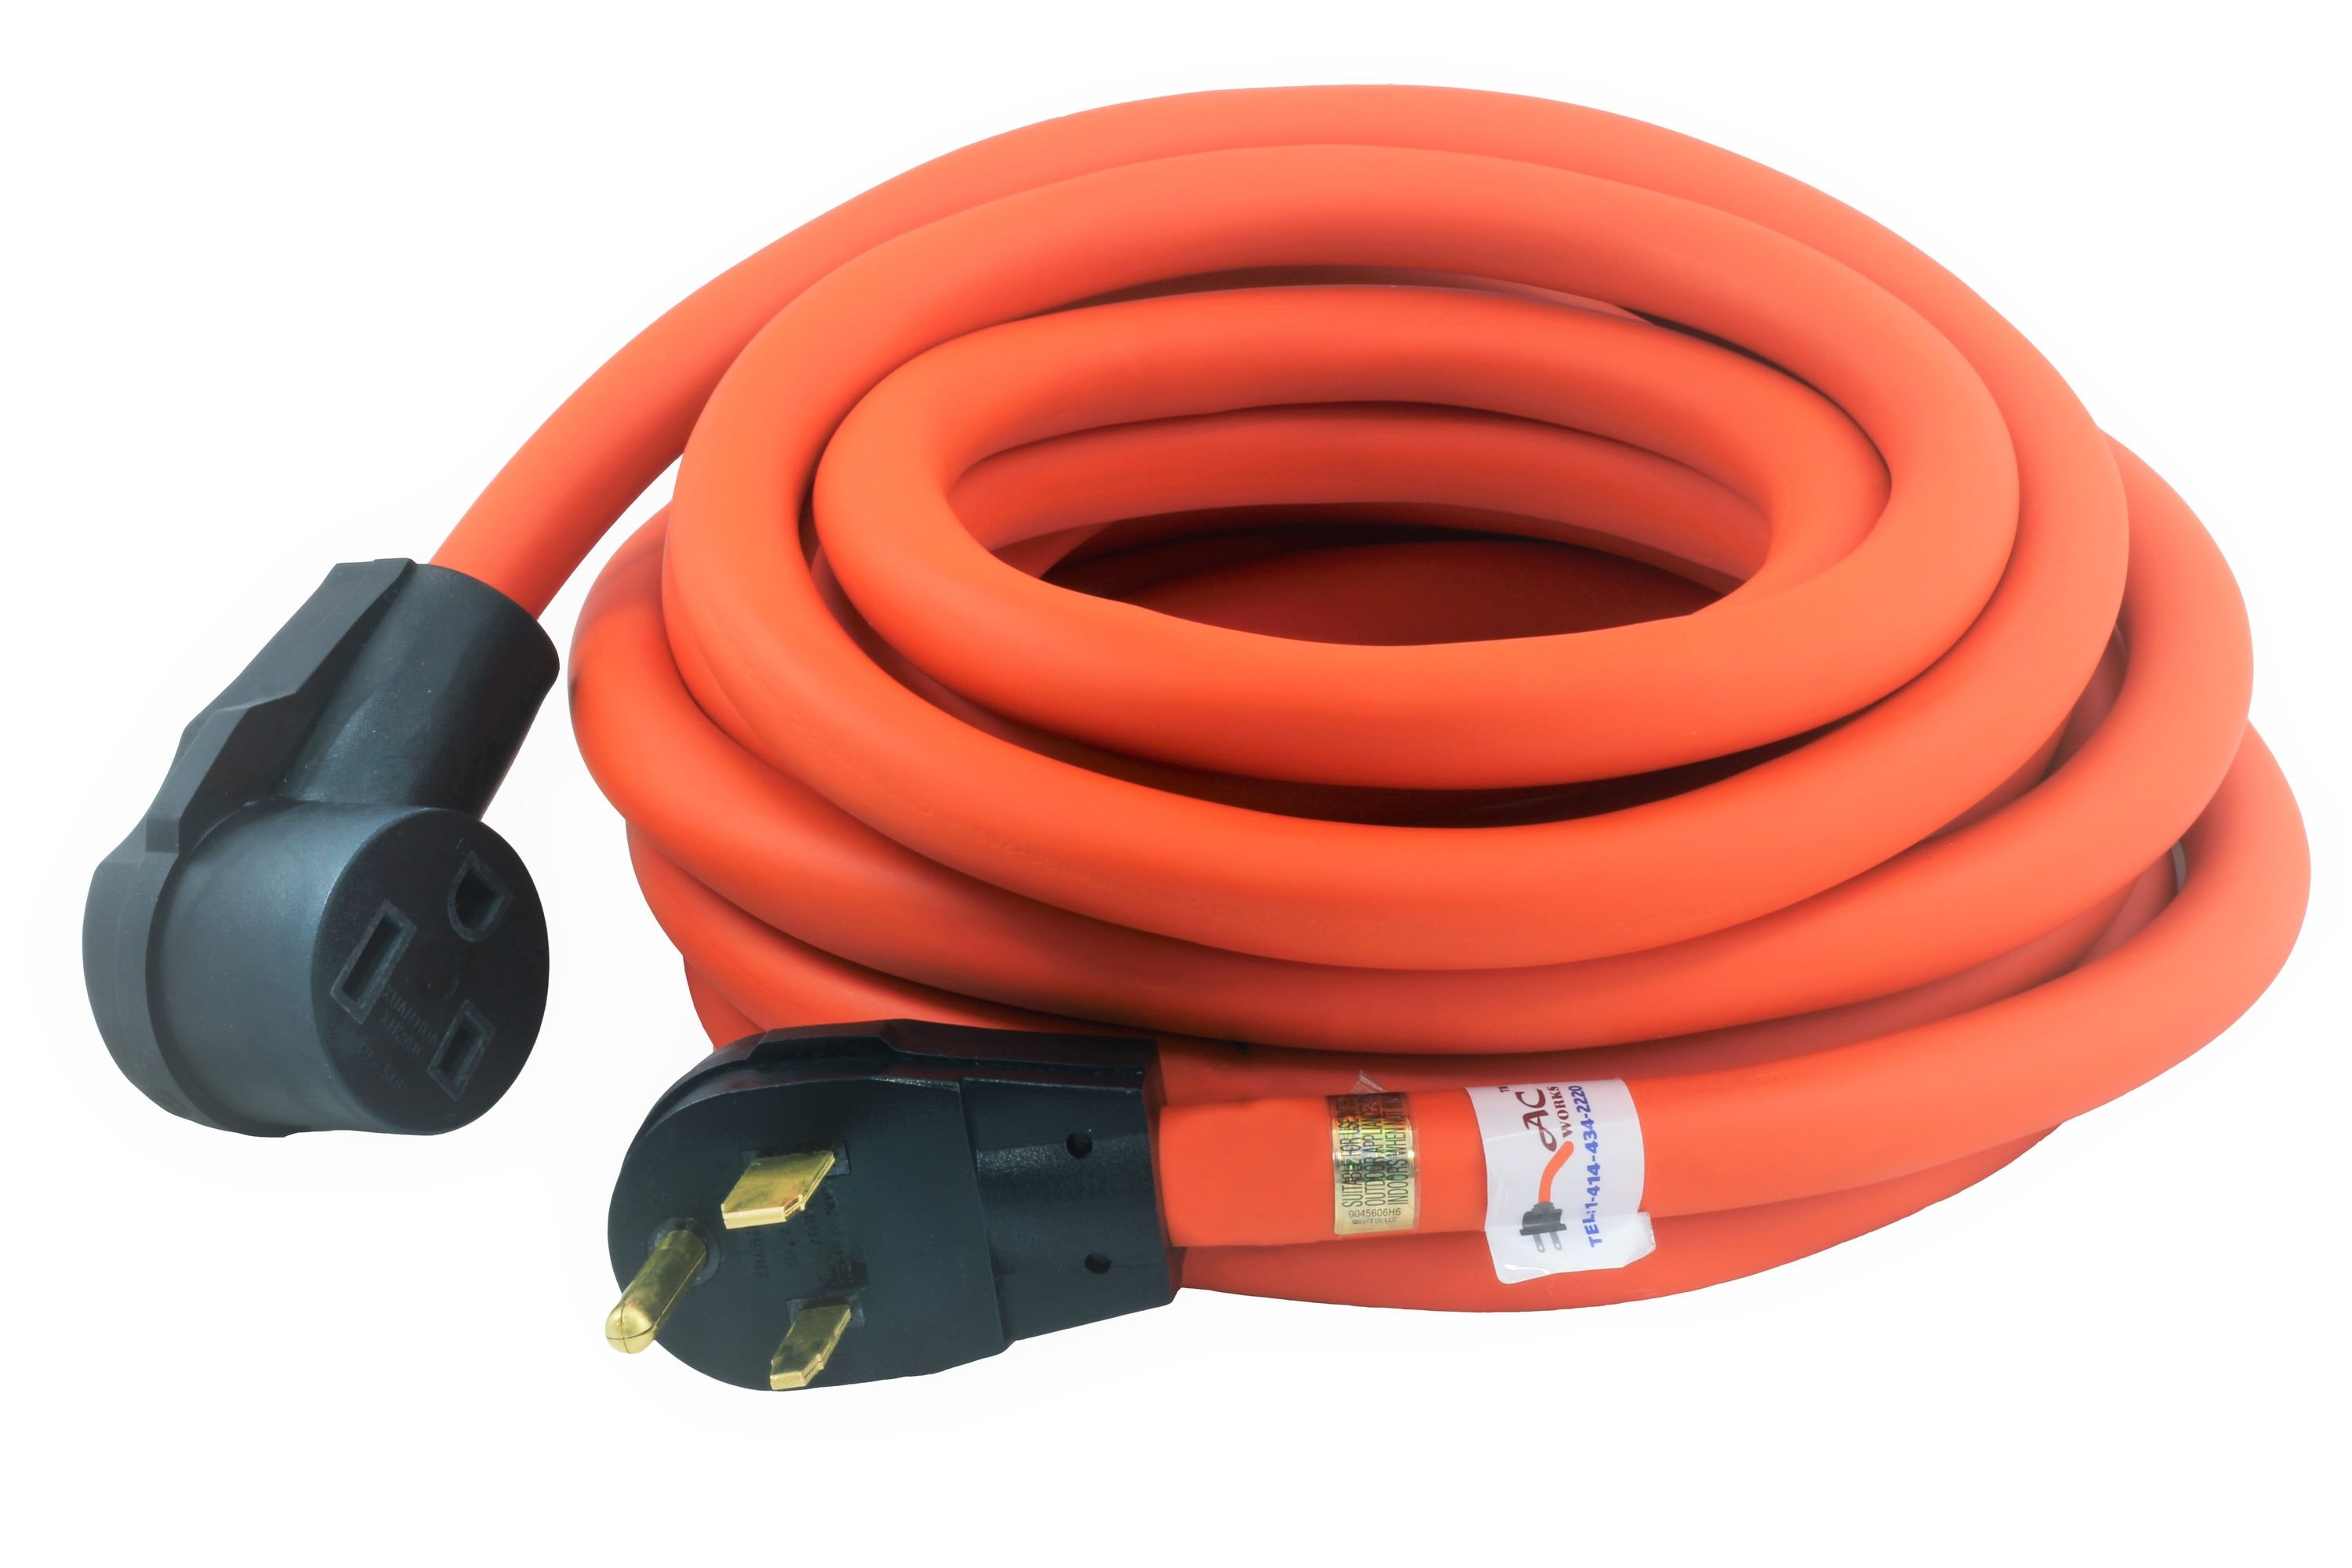 UL Listed Extension Cord 10 20 25 50 100 Feet Long Indoor Outdoor Orange Color 